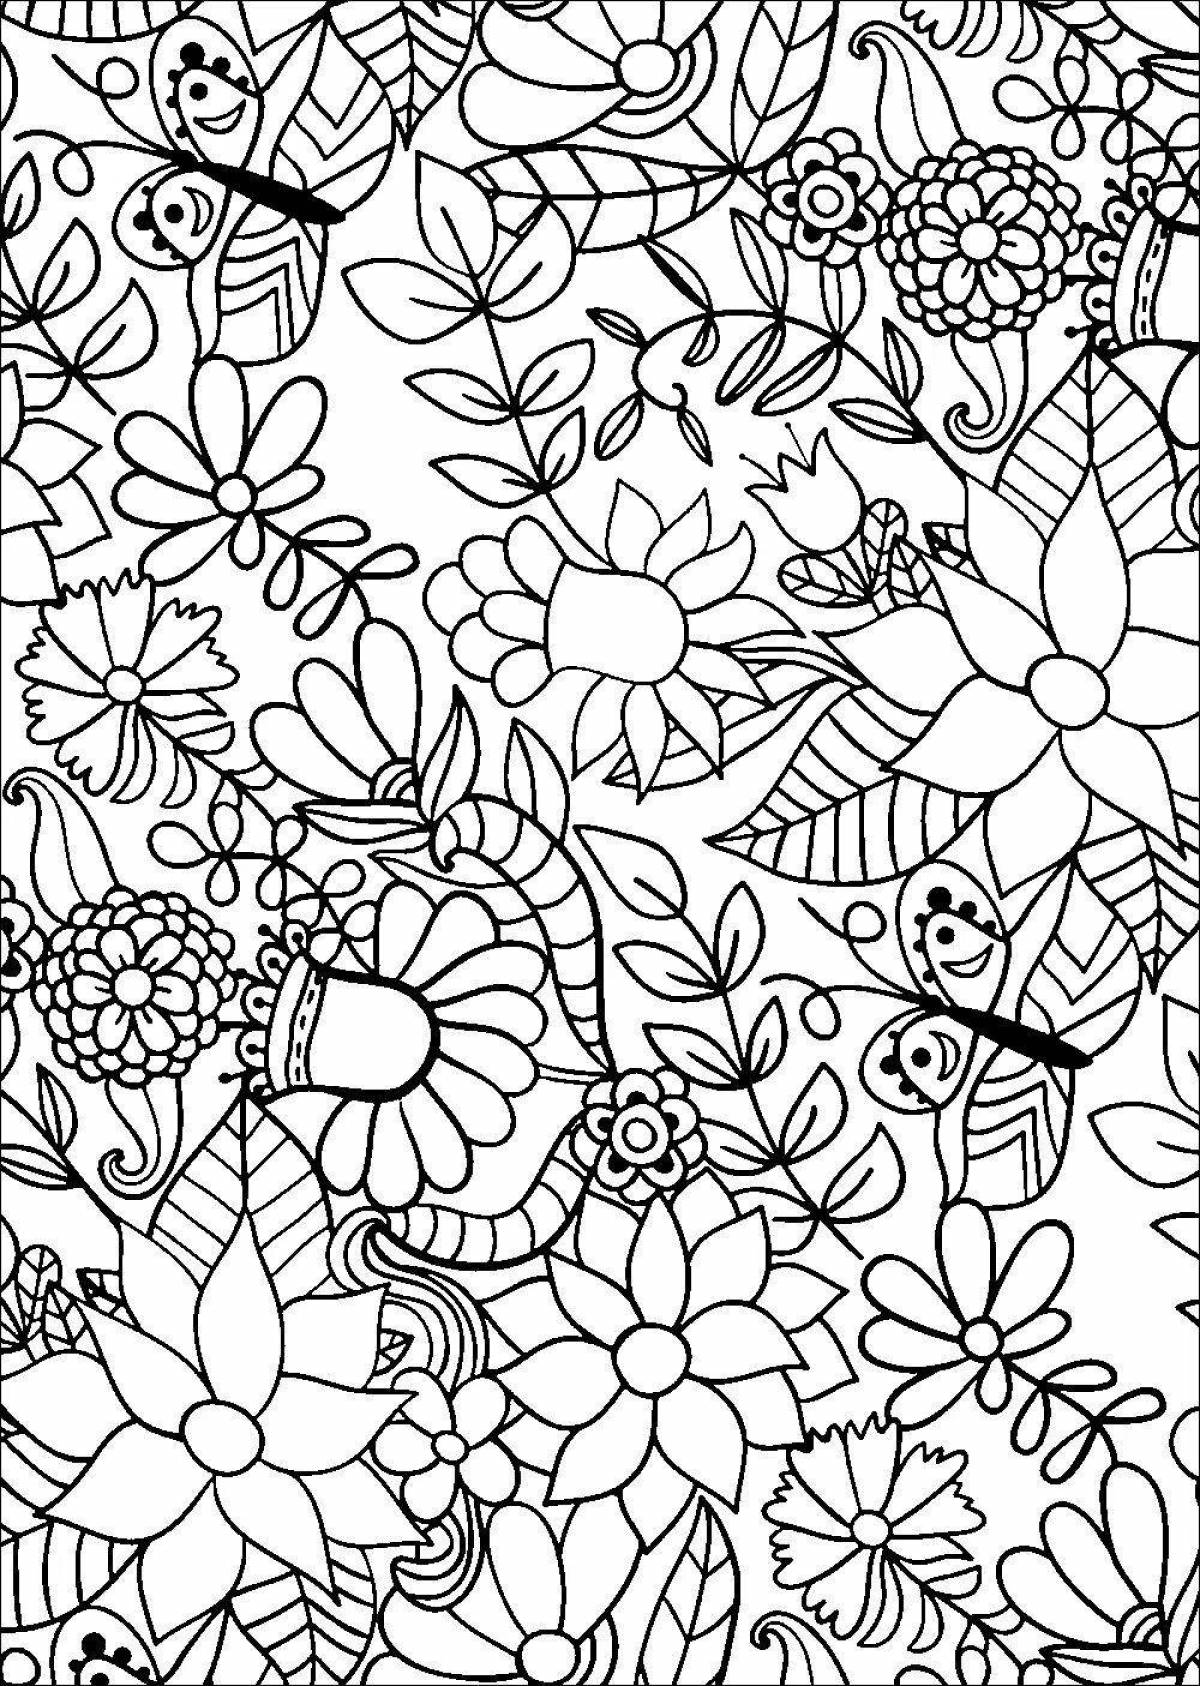 Radiant coloring page magic patterns